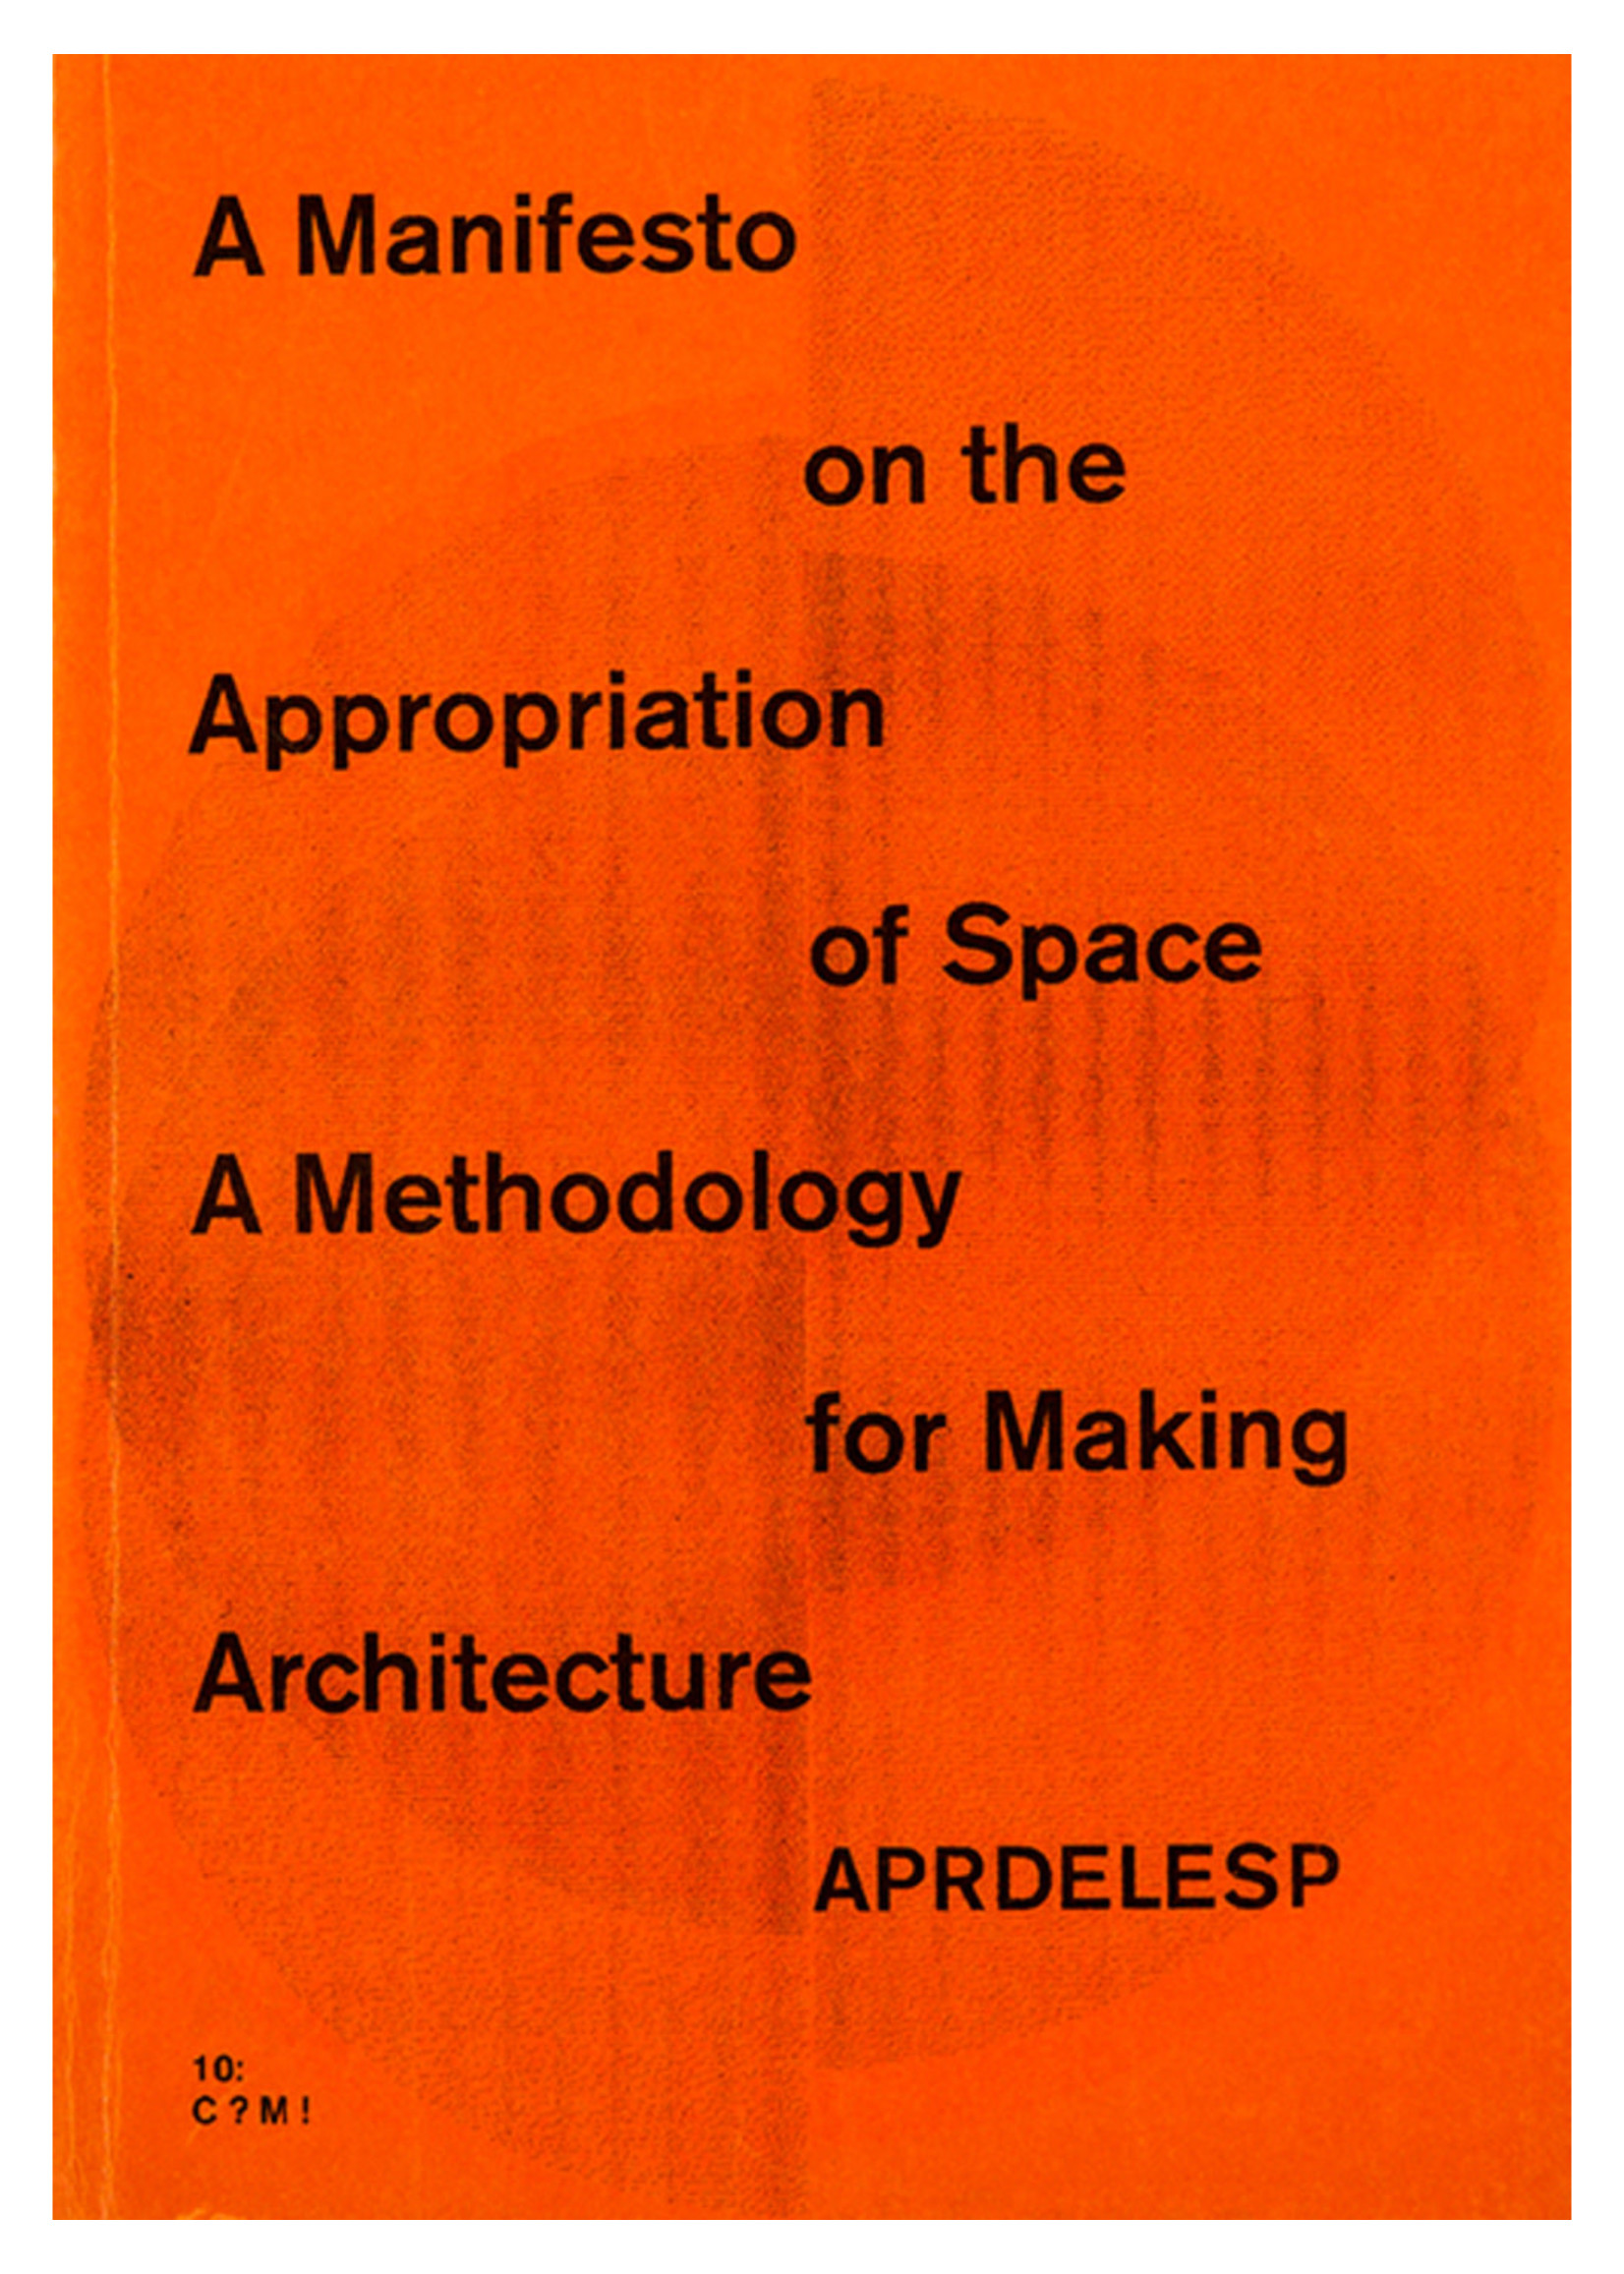 Gato Negro Ediciones A Manifesto on the Appropriation of Space. A Methodology or Making Architecture